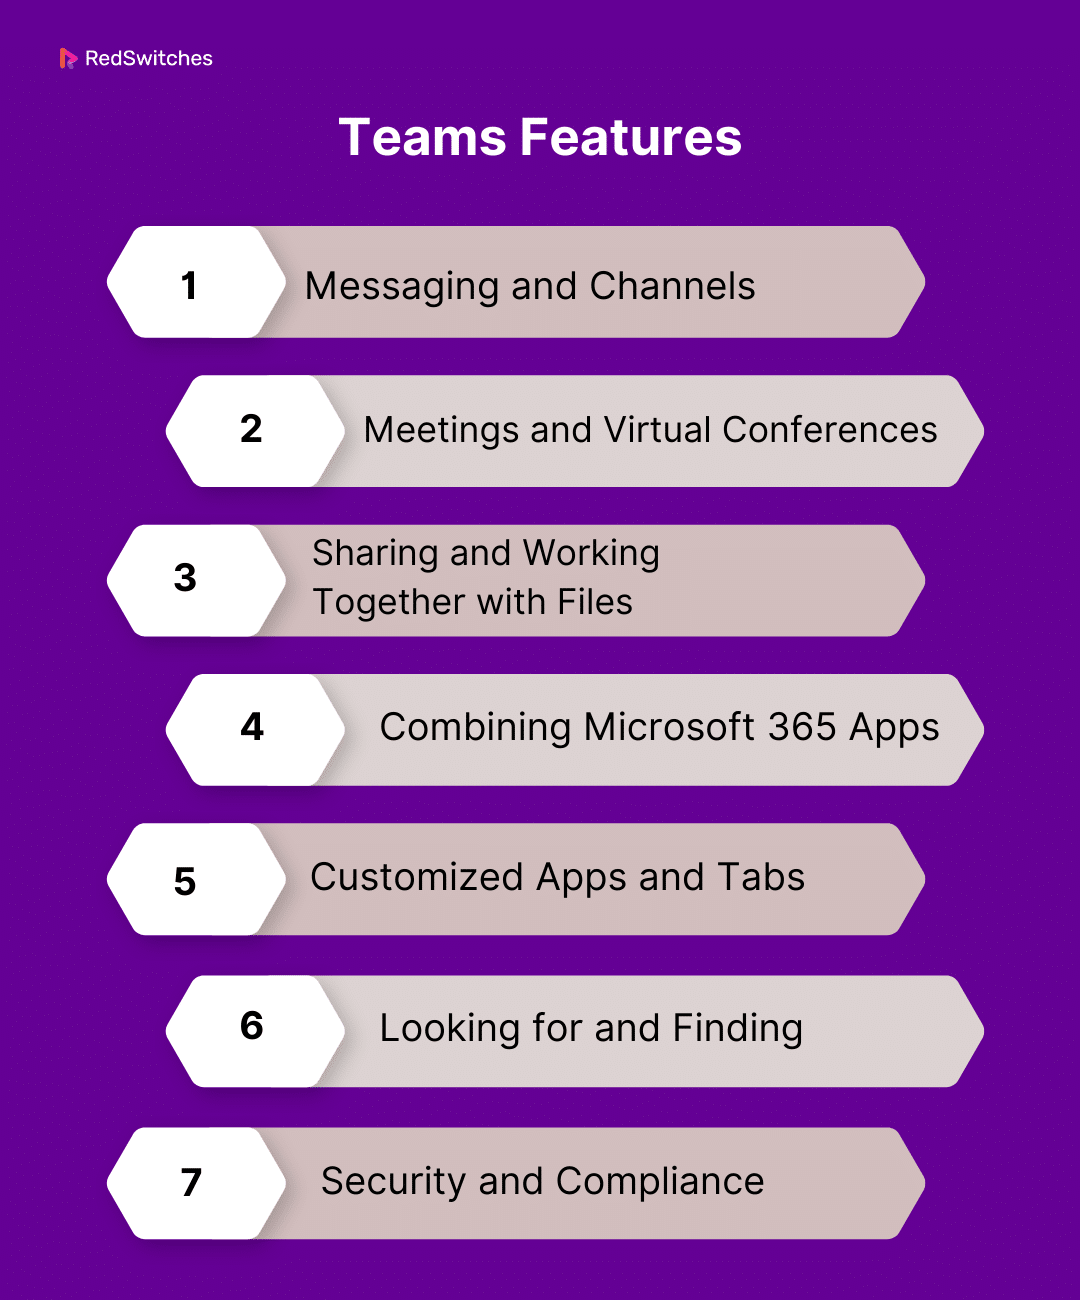 Features of Teams